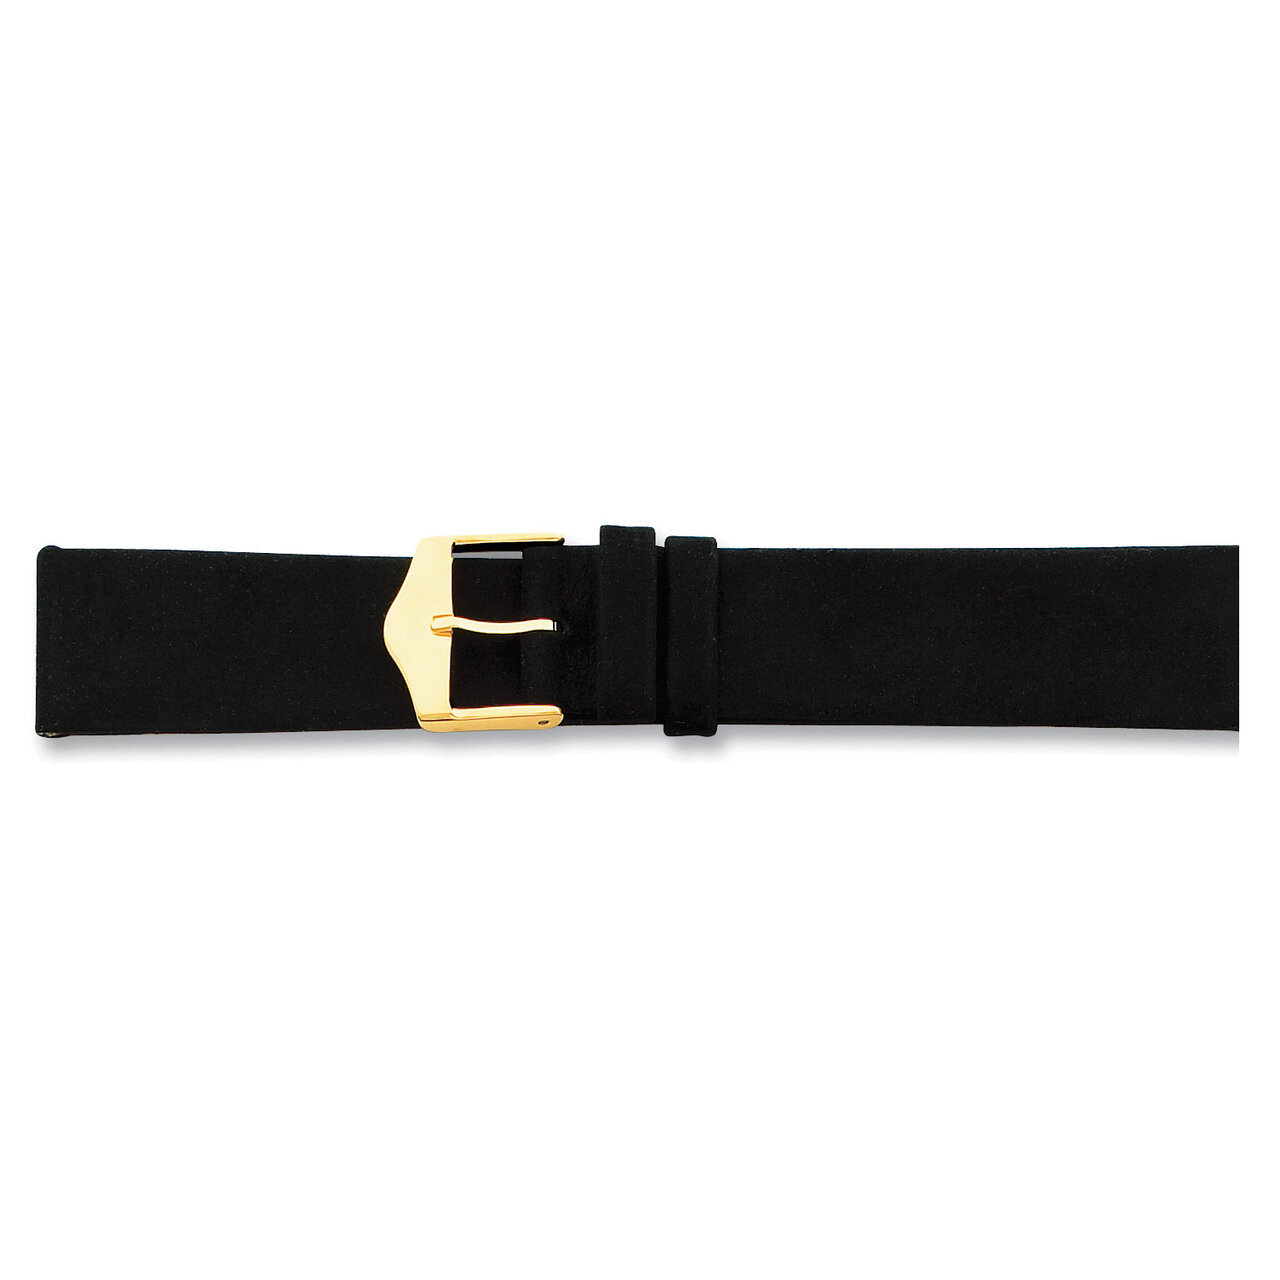 18mm Black Suede Leather Buckle Watch Band 7.5 Inch Gold-tone BA120-18